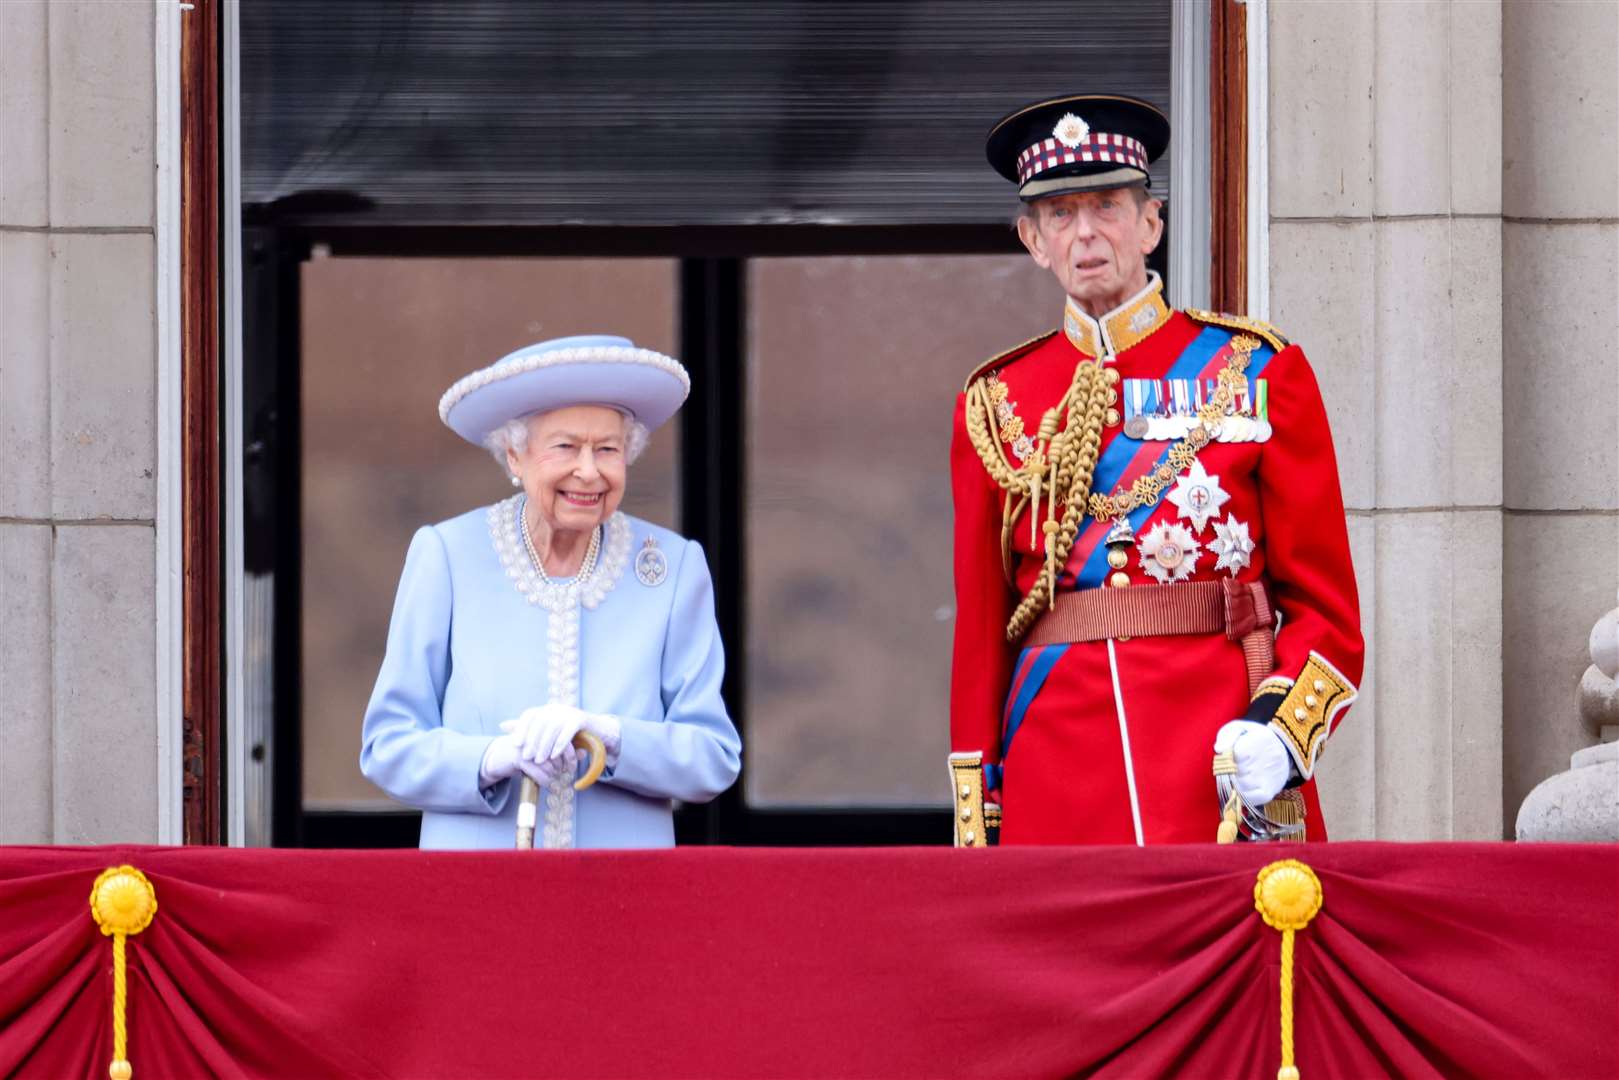 The Queen and her cousin the Duke of Kent inspecting the troops from Buckingham Palace (Chris Jackson/PA)